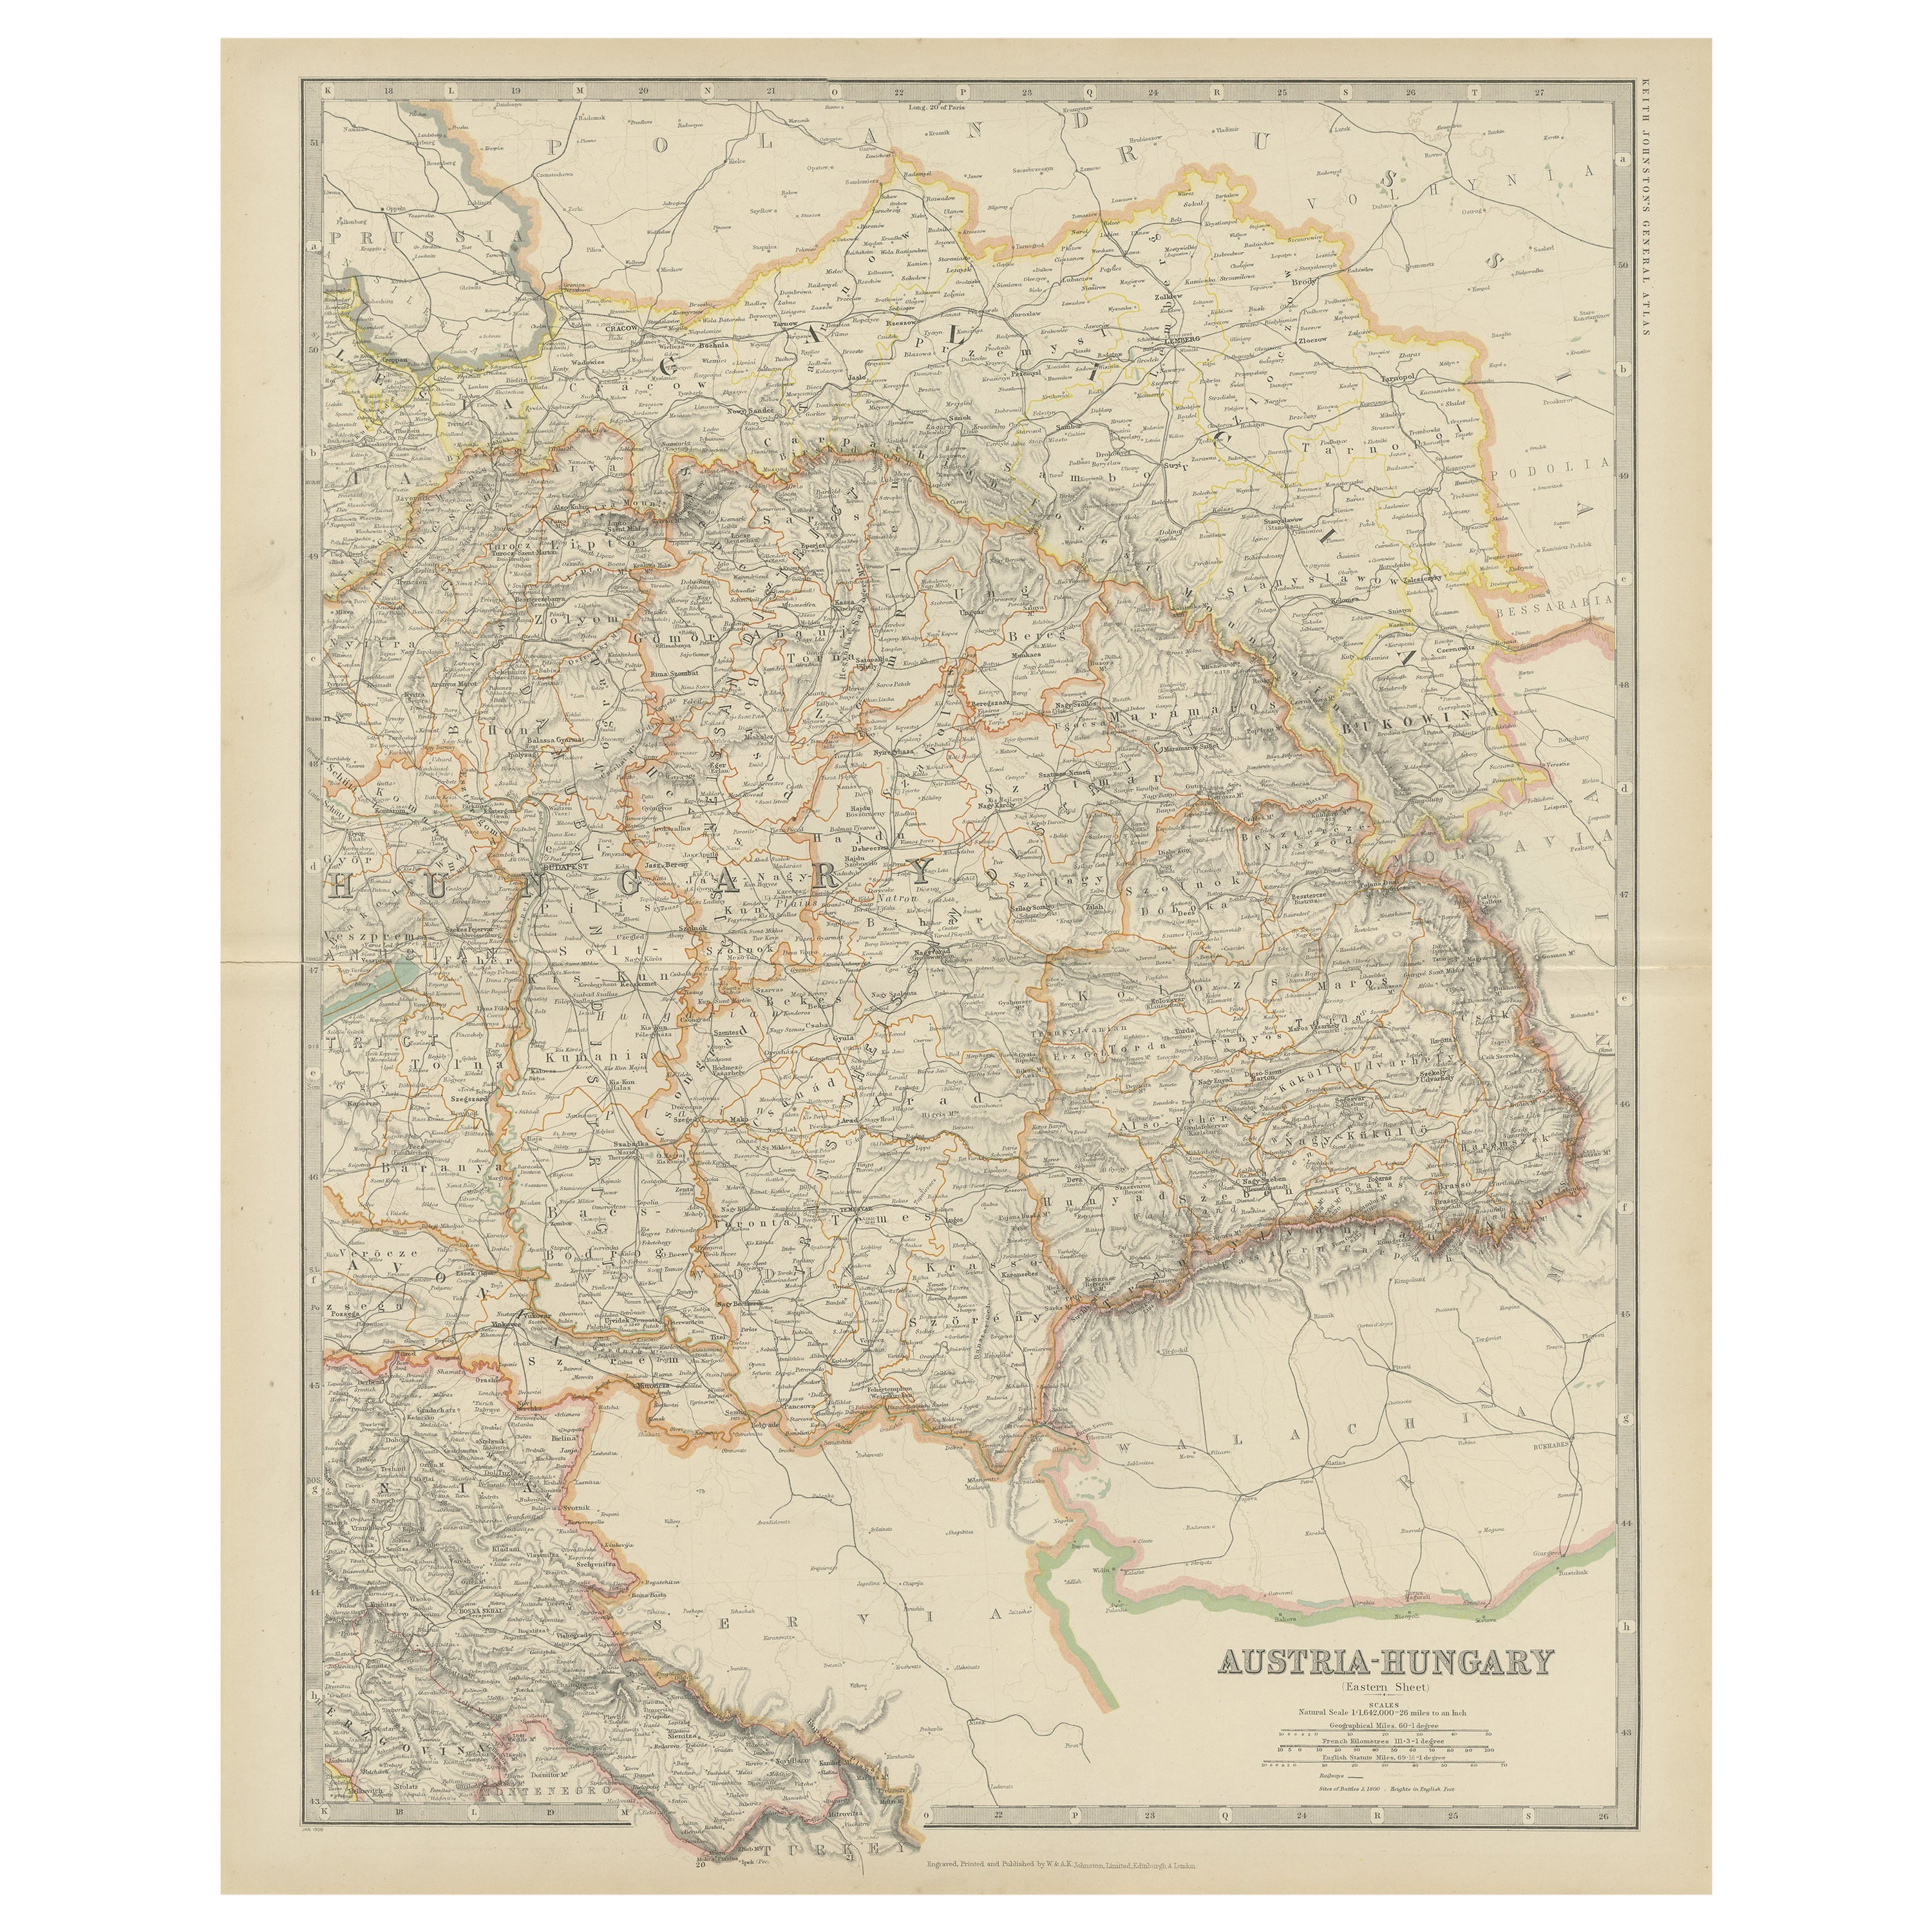 Antique Map of Austria- Hungary by Johnston, '1909'